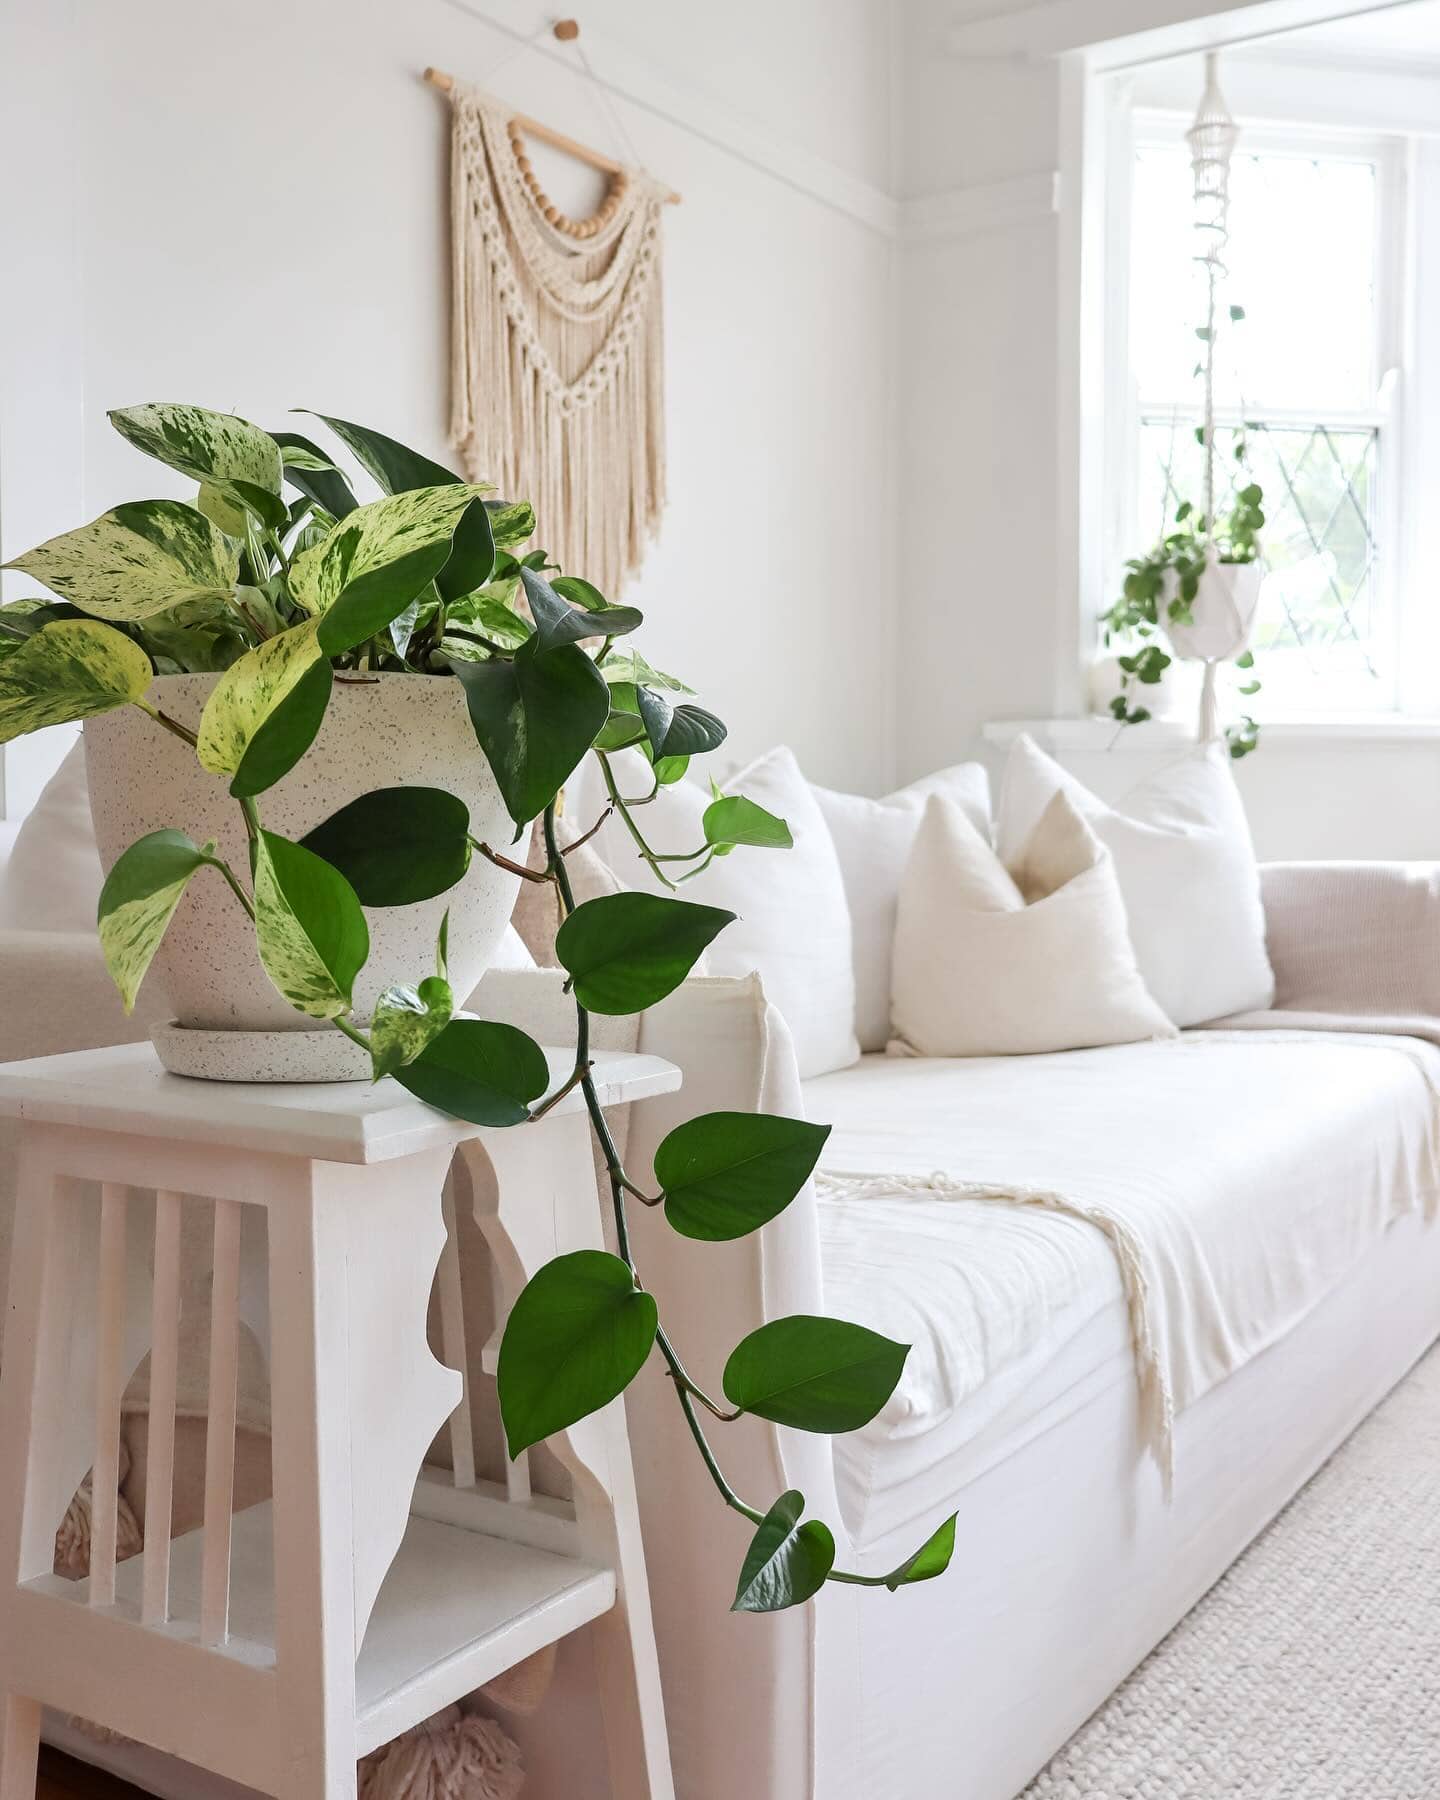 Pothos indoor plant next to sofa as hard-to-kill indoor plant option